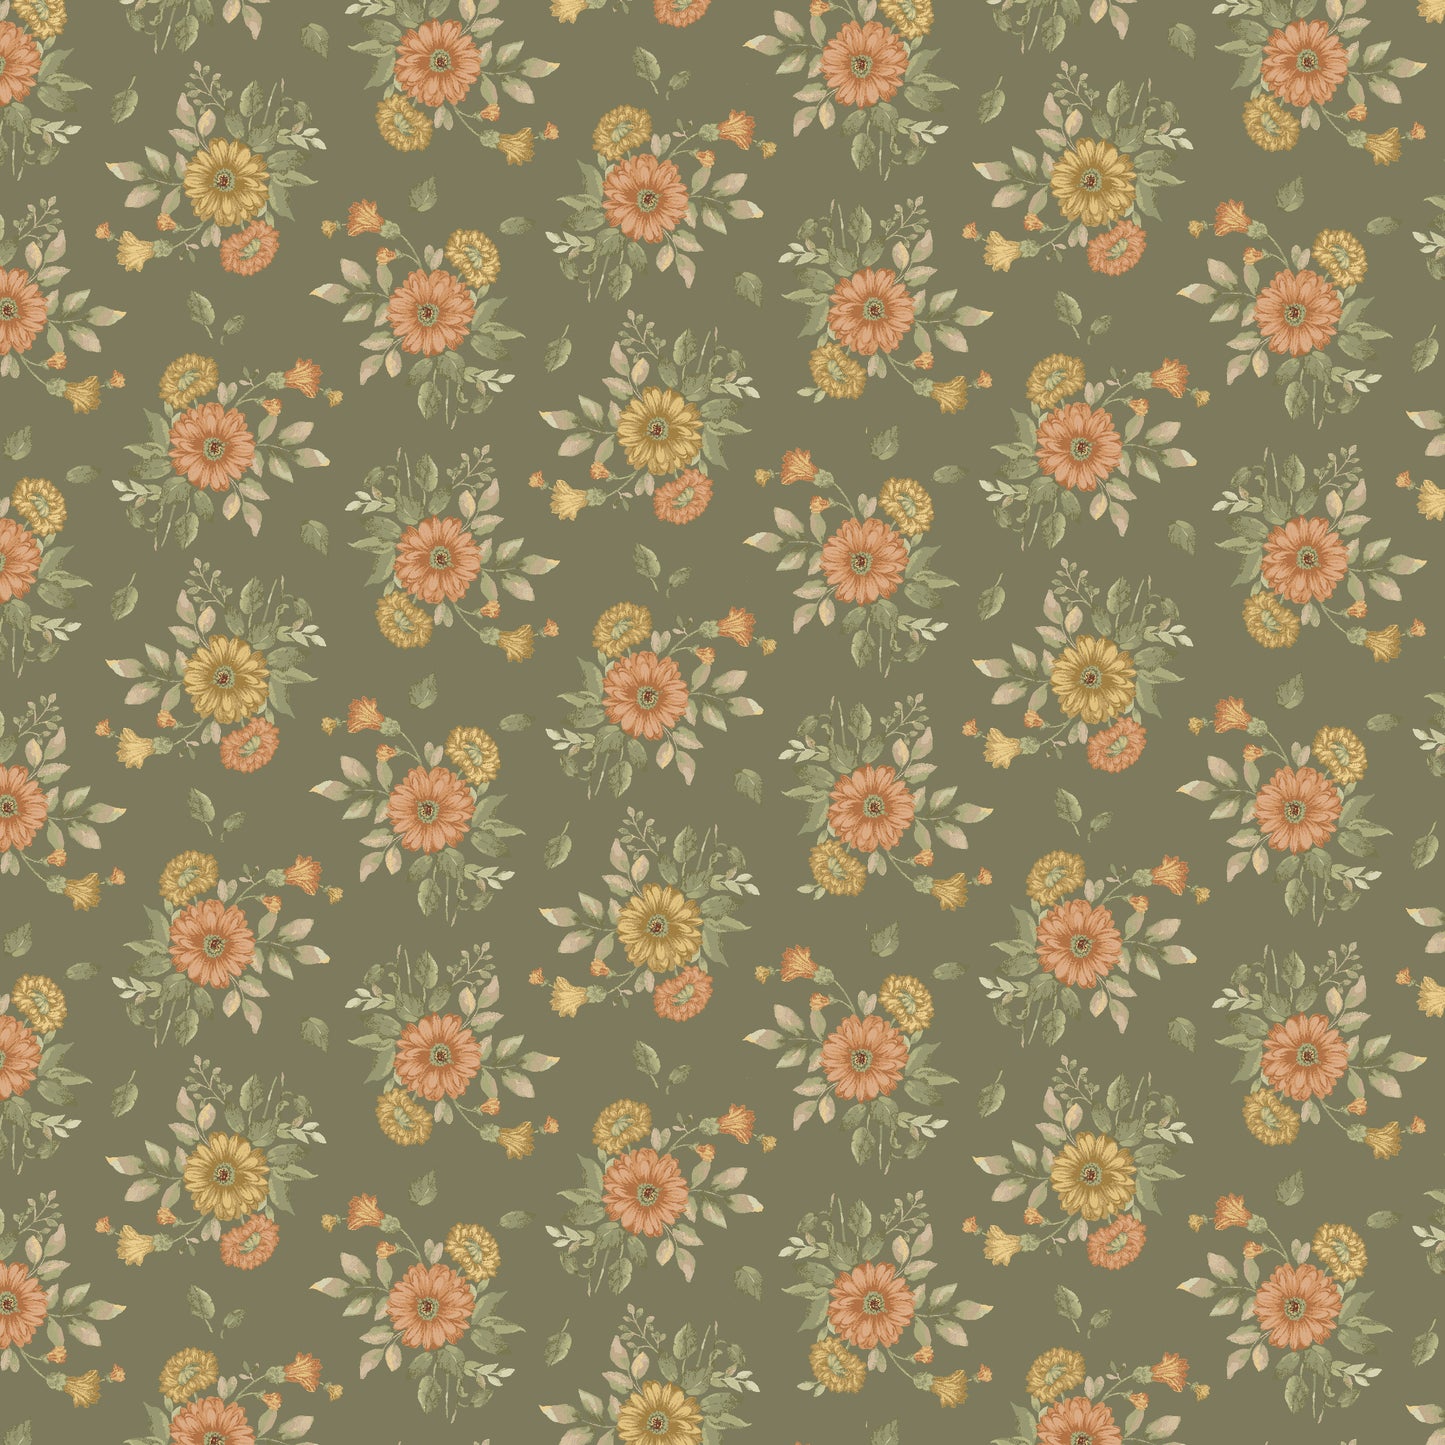 Front Porch - Floral, Green - PER 1/4 YARD